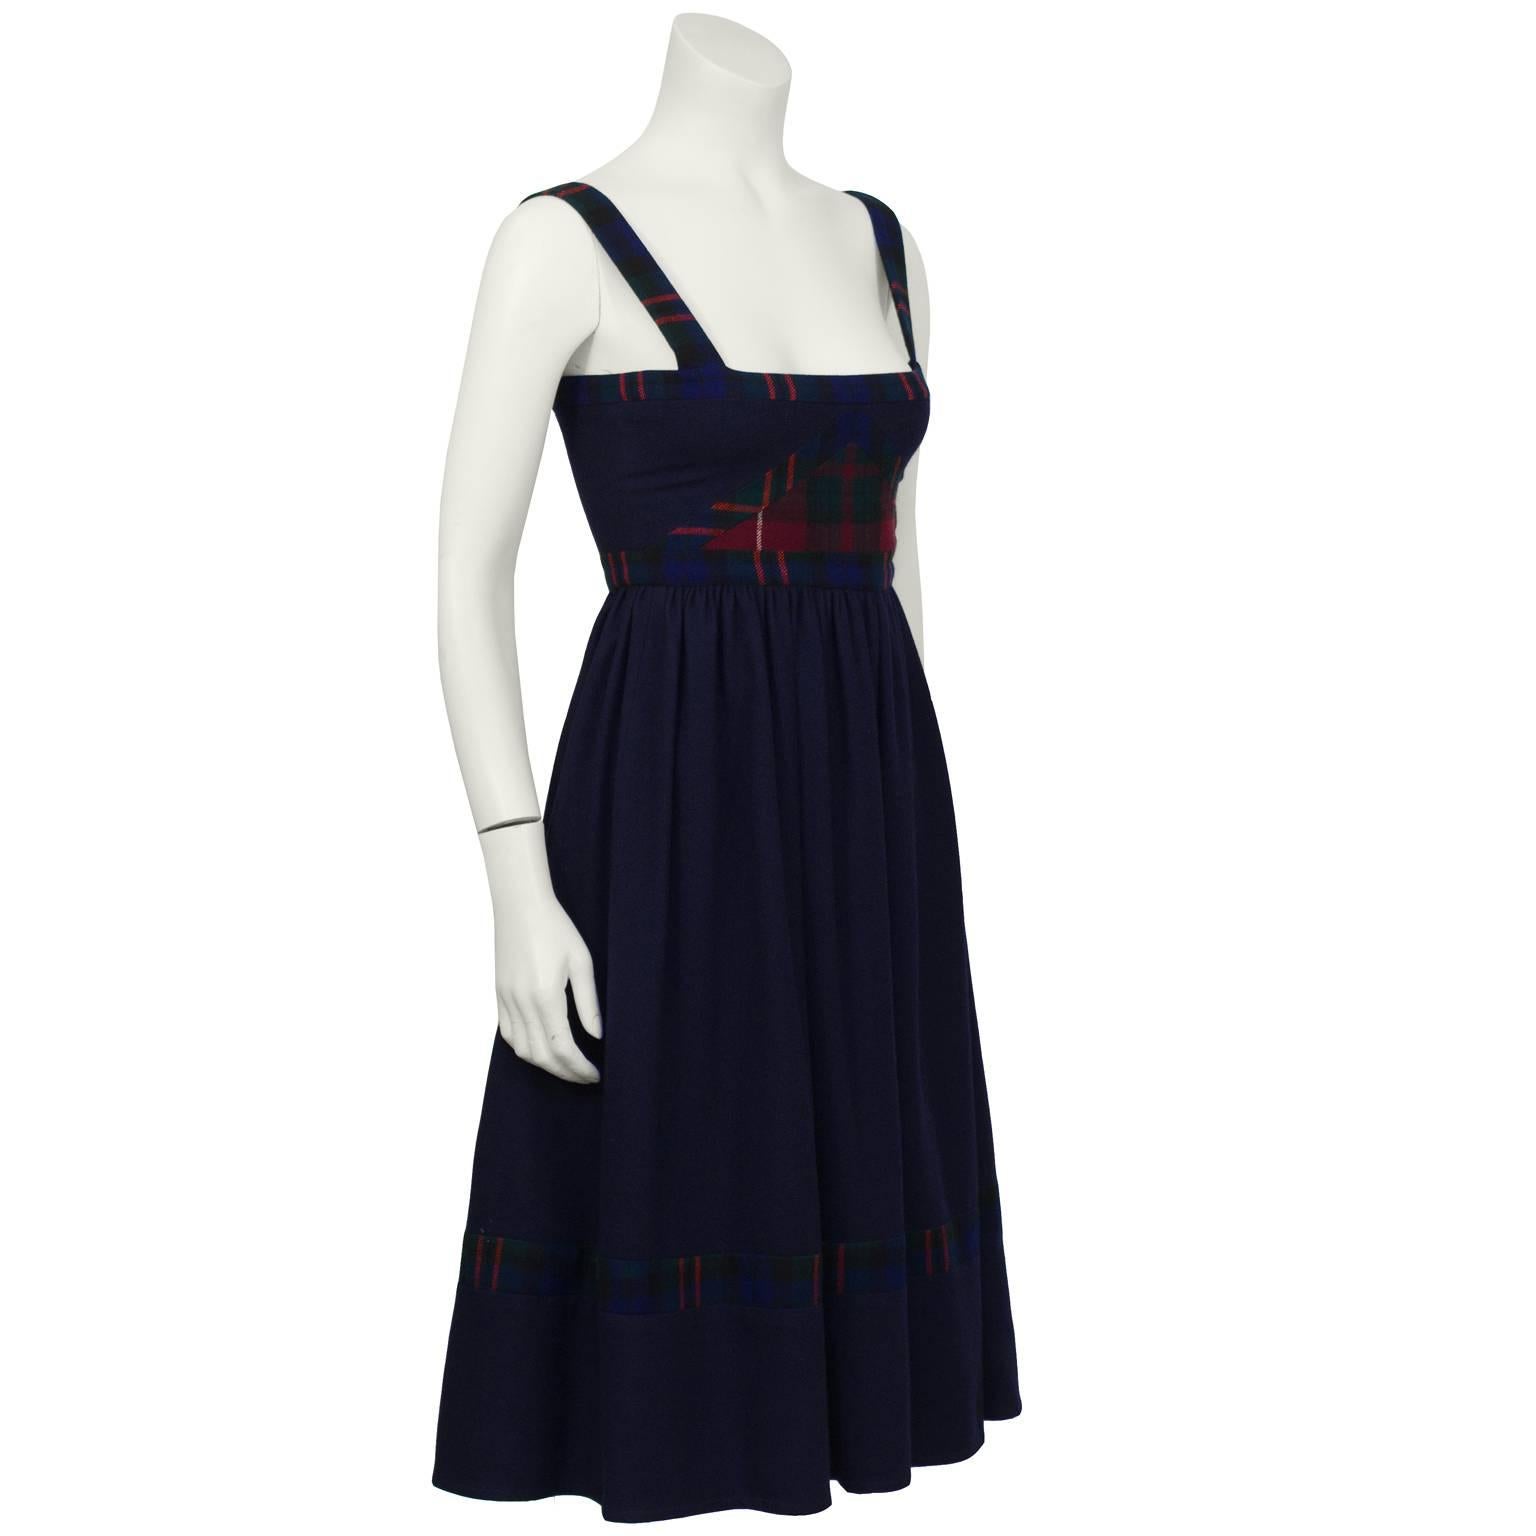 Anonymous navy and plaid wool jumper from the 1970’s. The jumper has wide plaid shoulder straps and a fitted bodice featuring a triangular plaid detail. The full skirt is slightly pleated at the natural waist, falls to the midi length and is